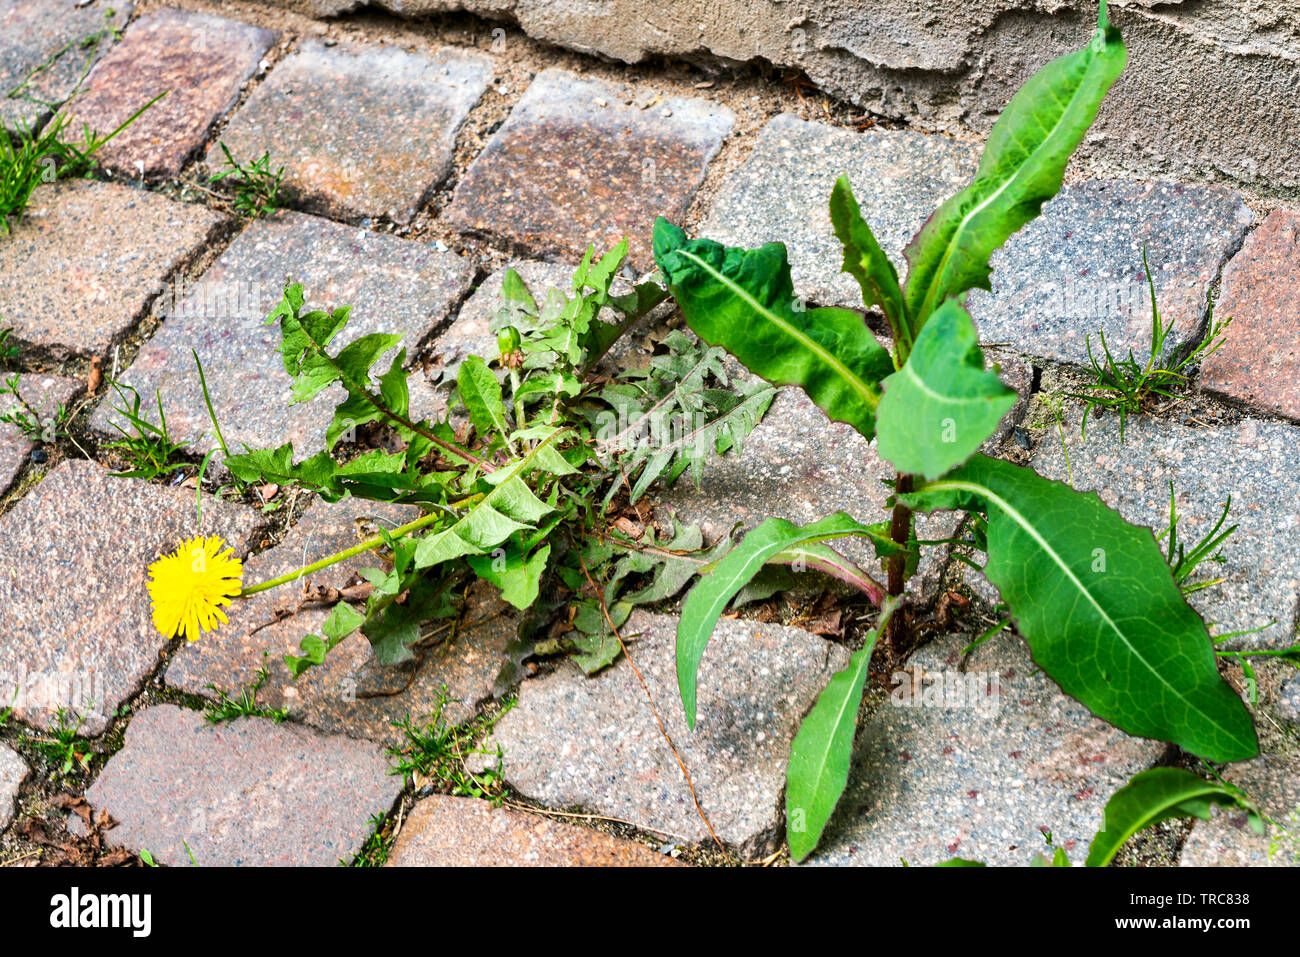 Weed control in the city. Dandelion and thistle on the sidewalk between the paving bricks. Stock Photo